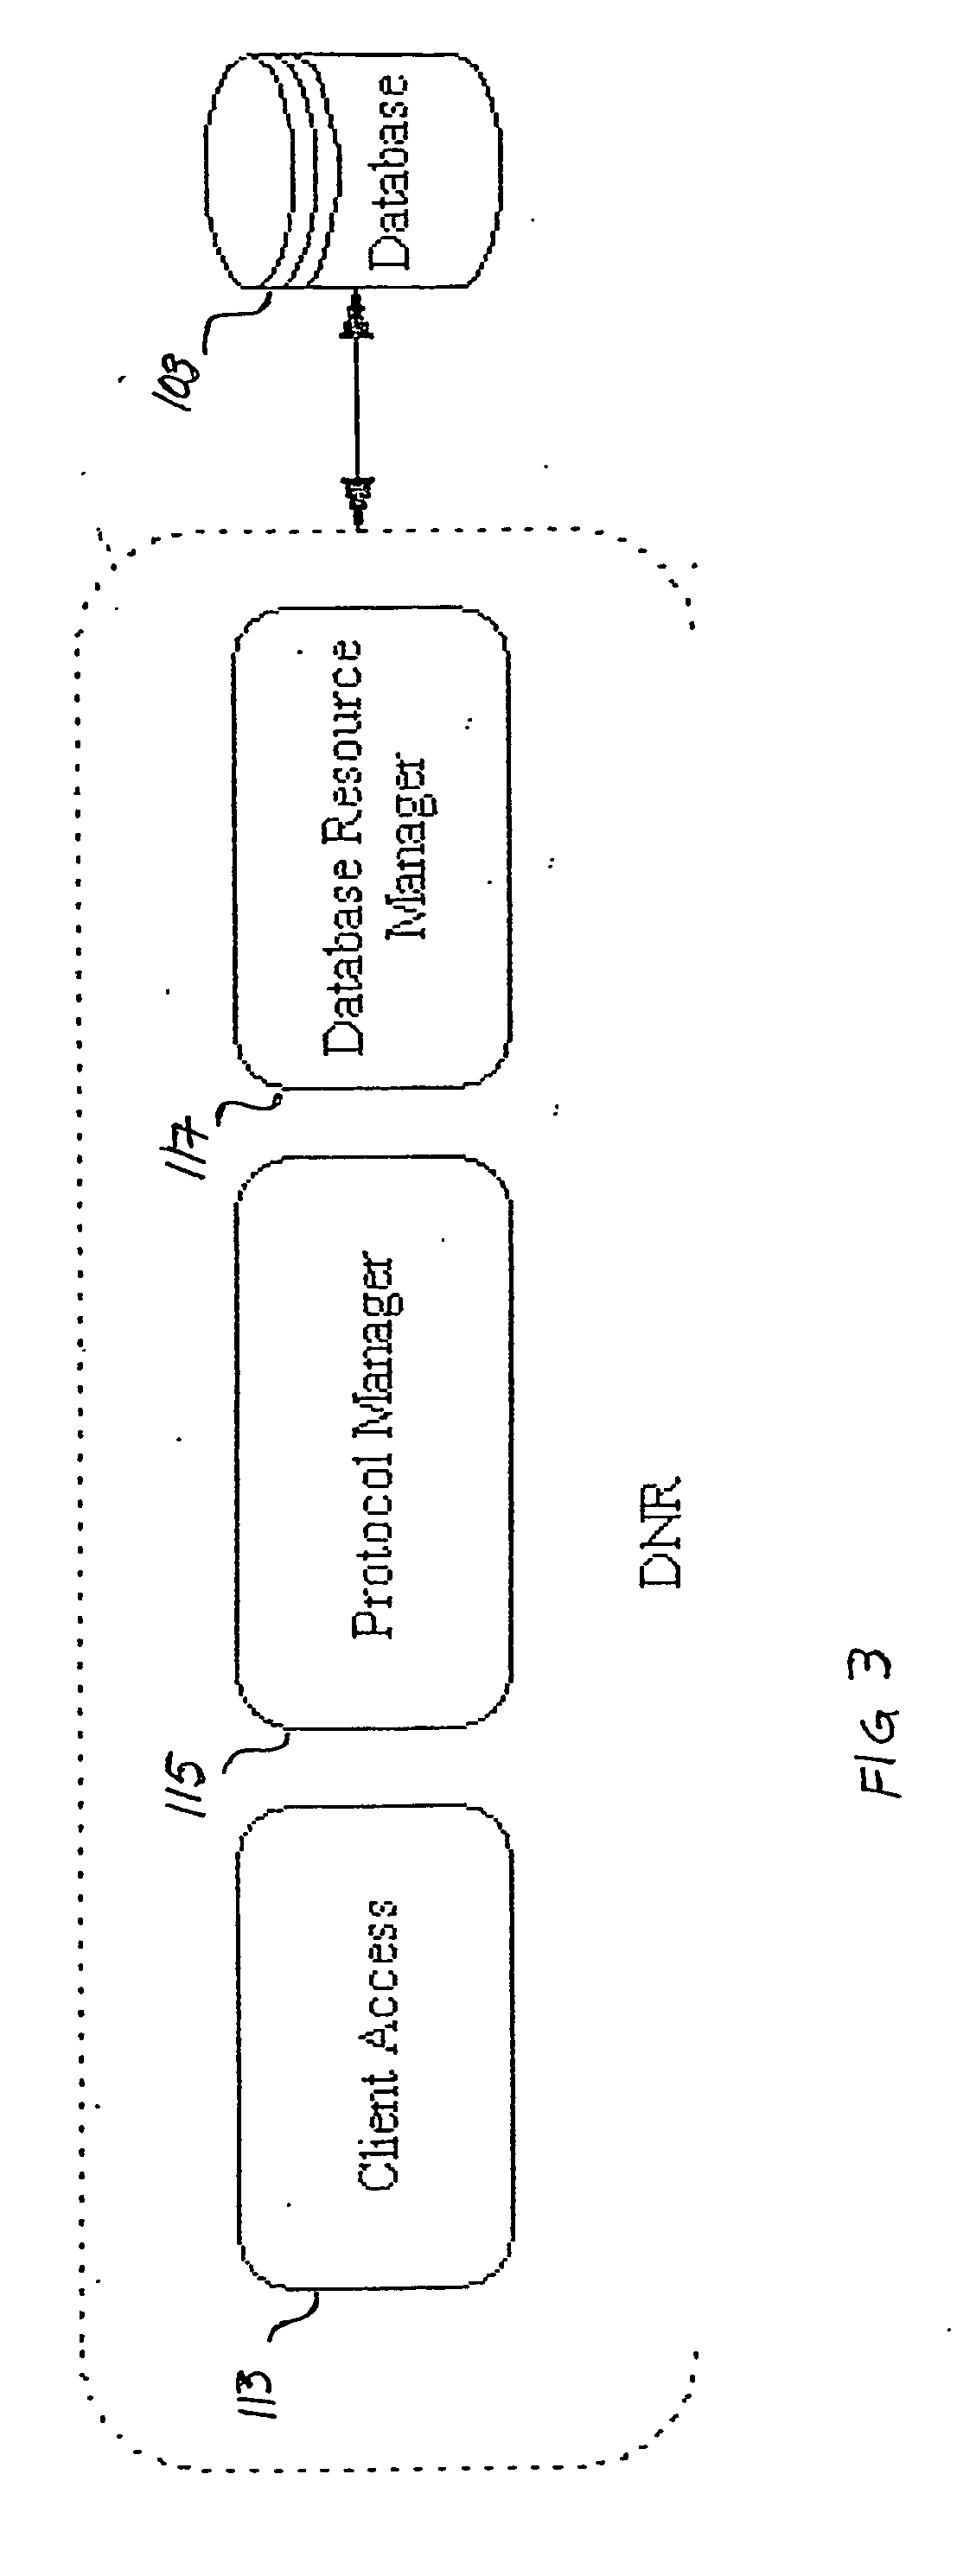 System and method for the optimization of database acess in data base networks